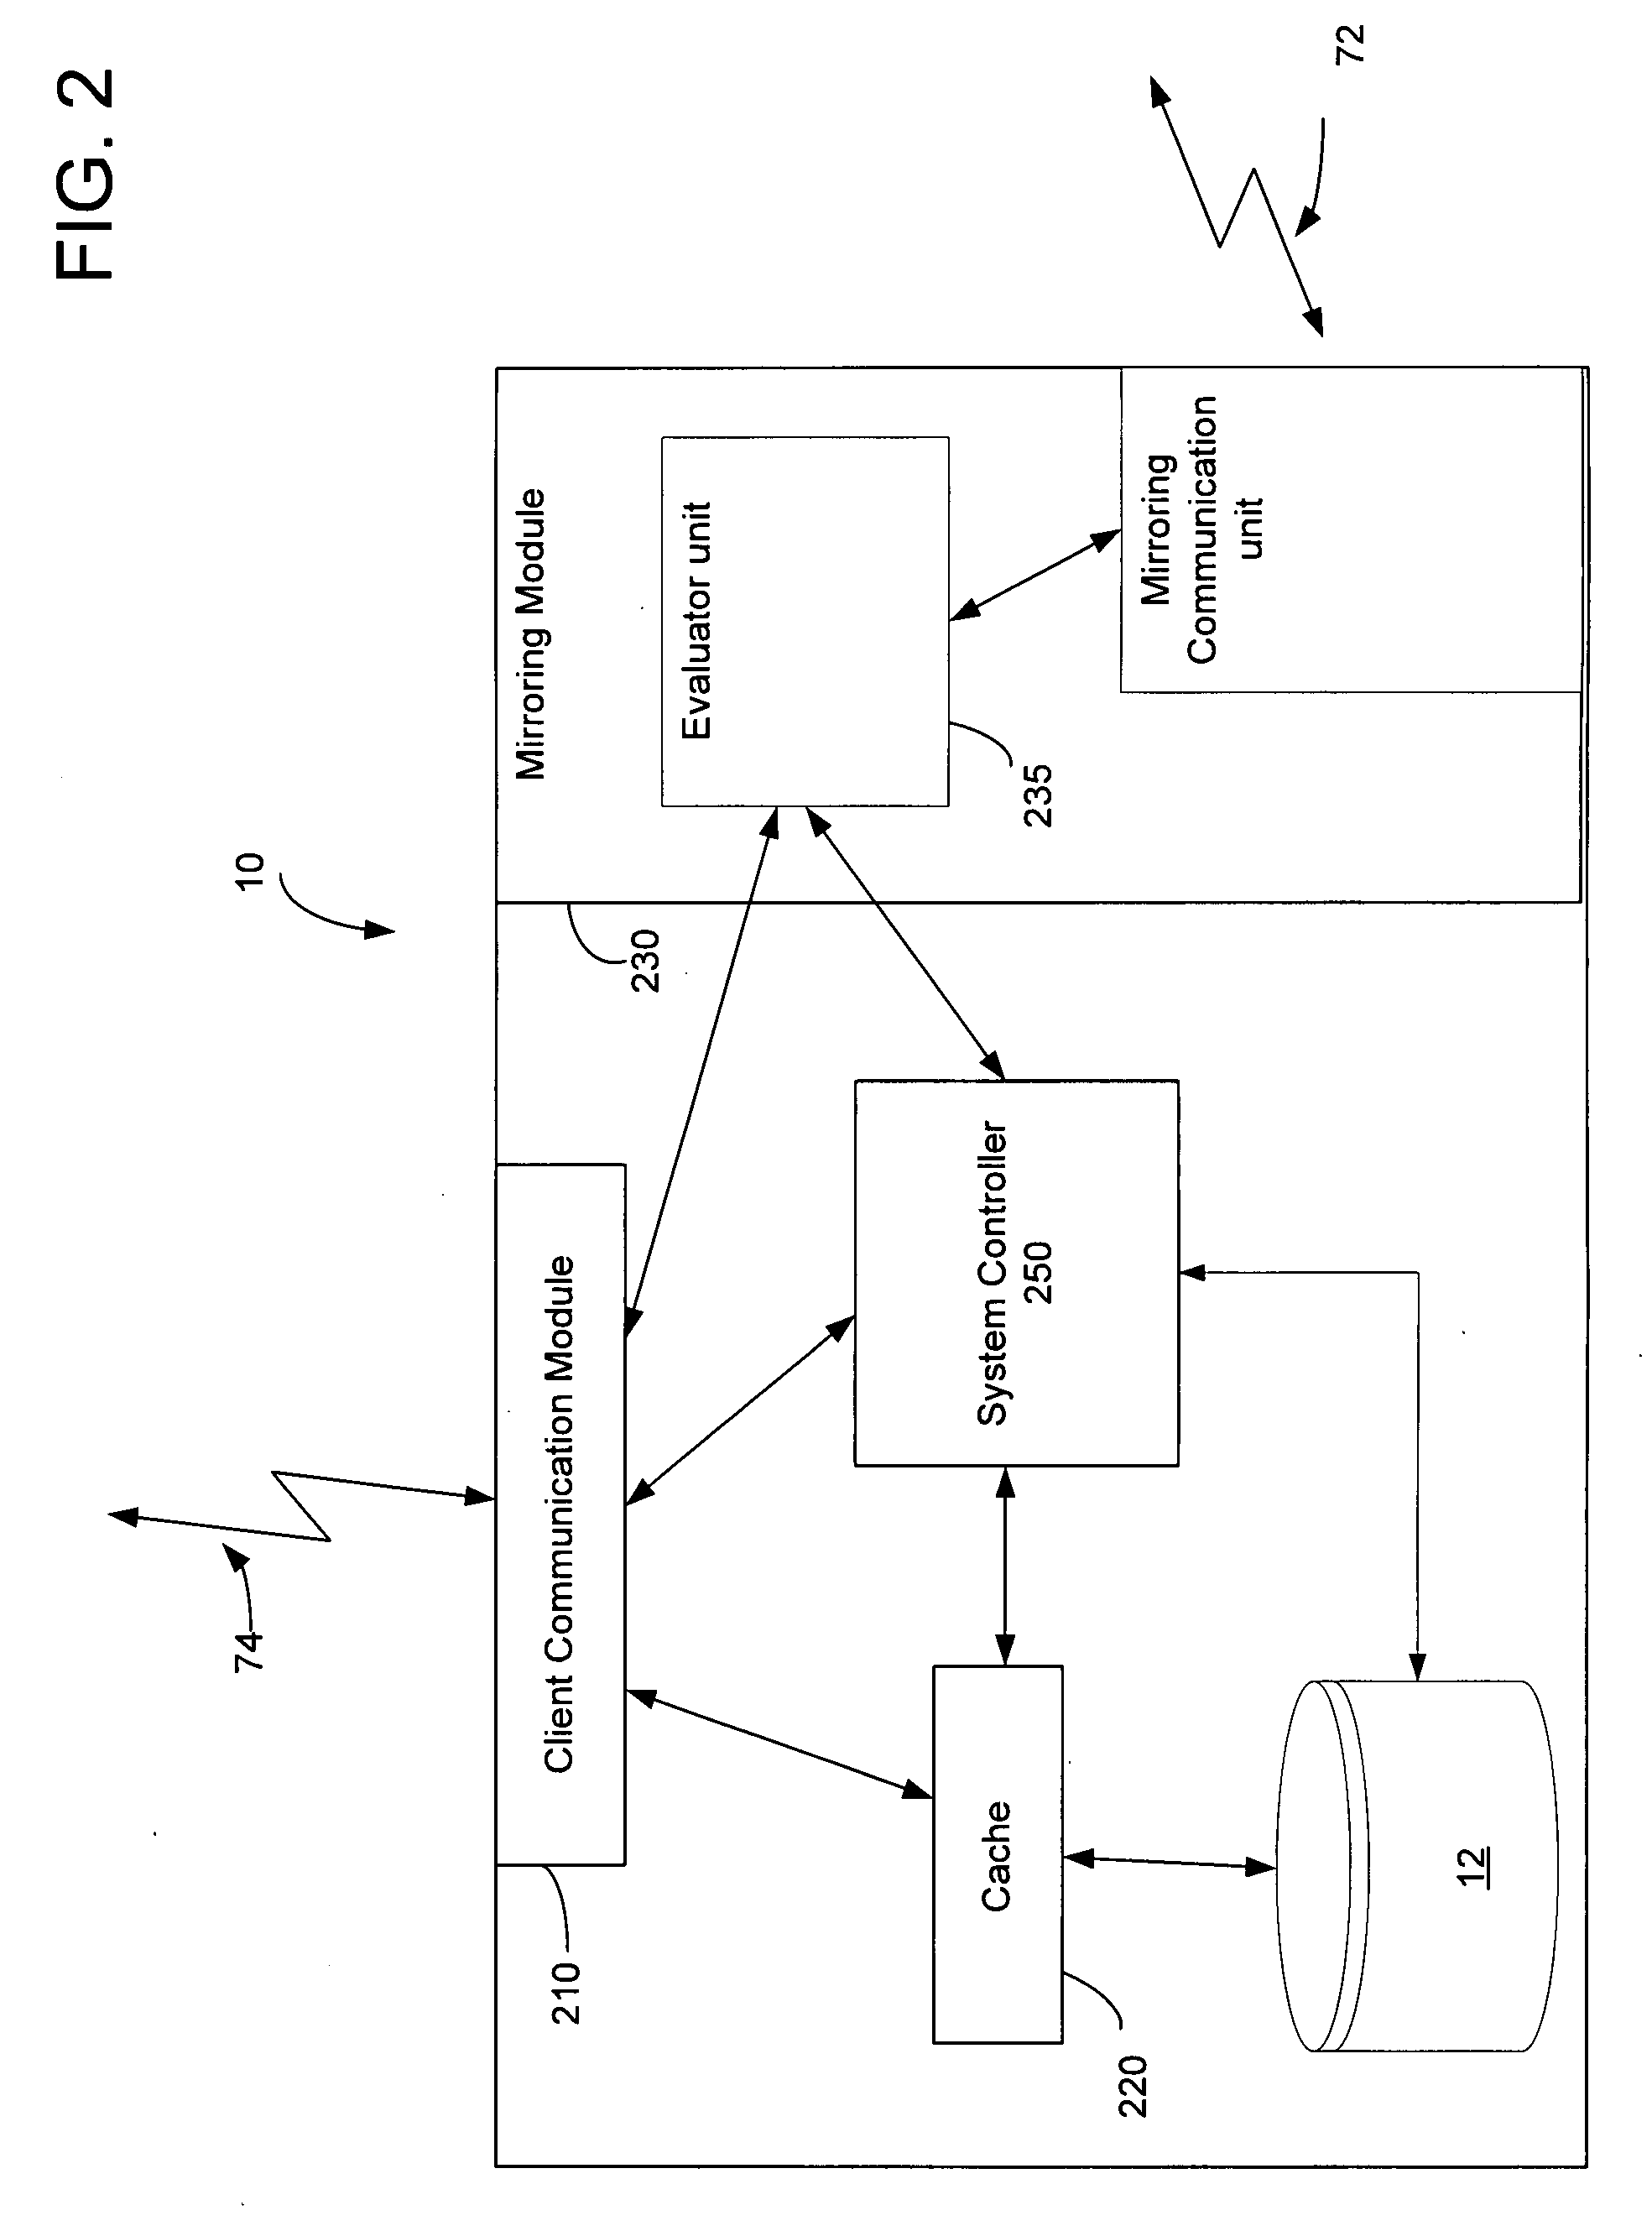 System method and circuit for differential mirroring of data